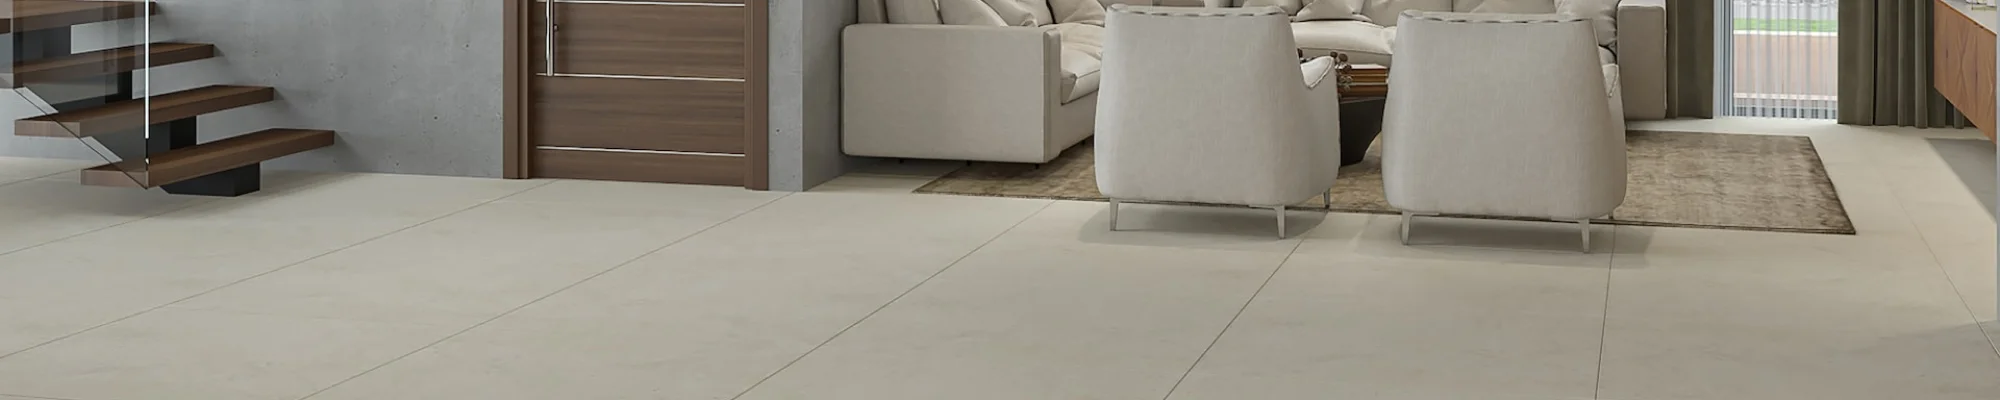 Tile info provided by Prestige Flooring Center |  Cathedral City, CA.